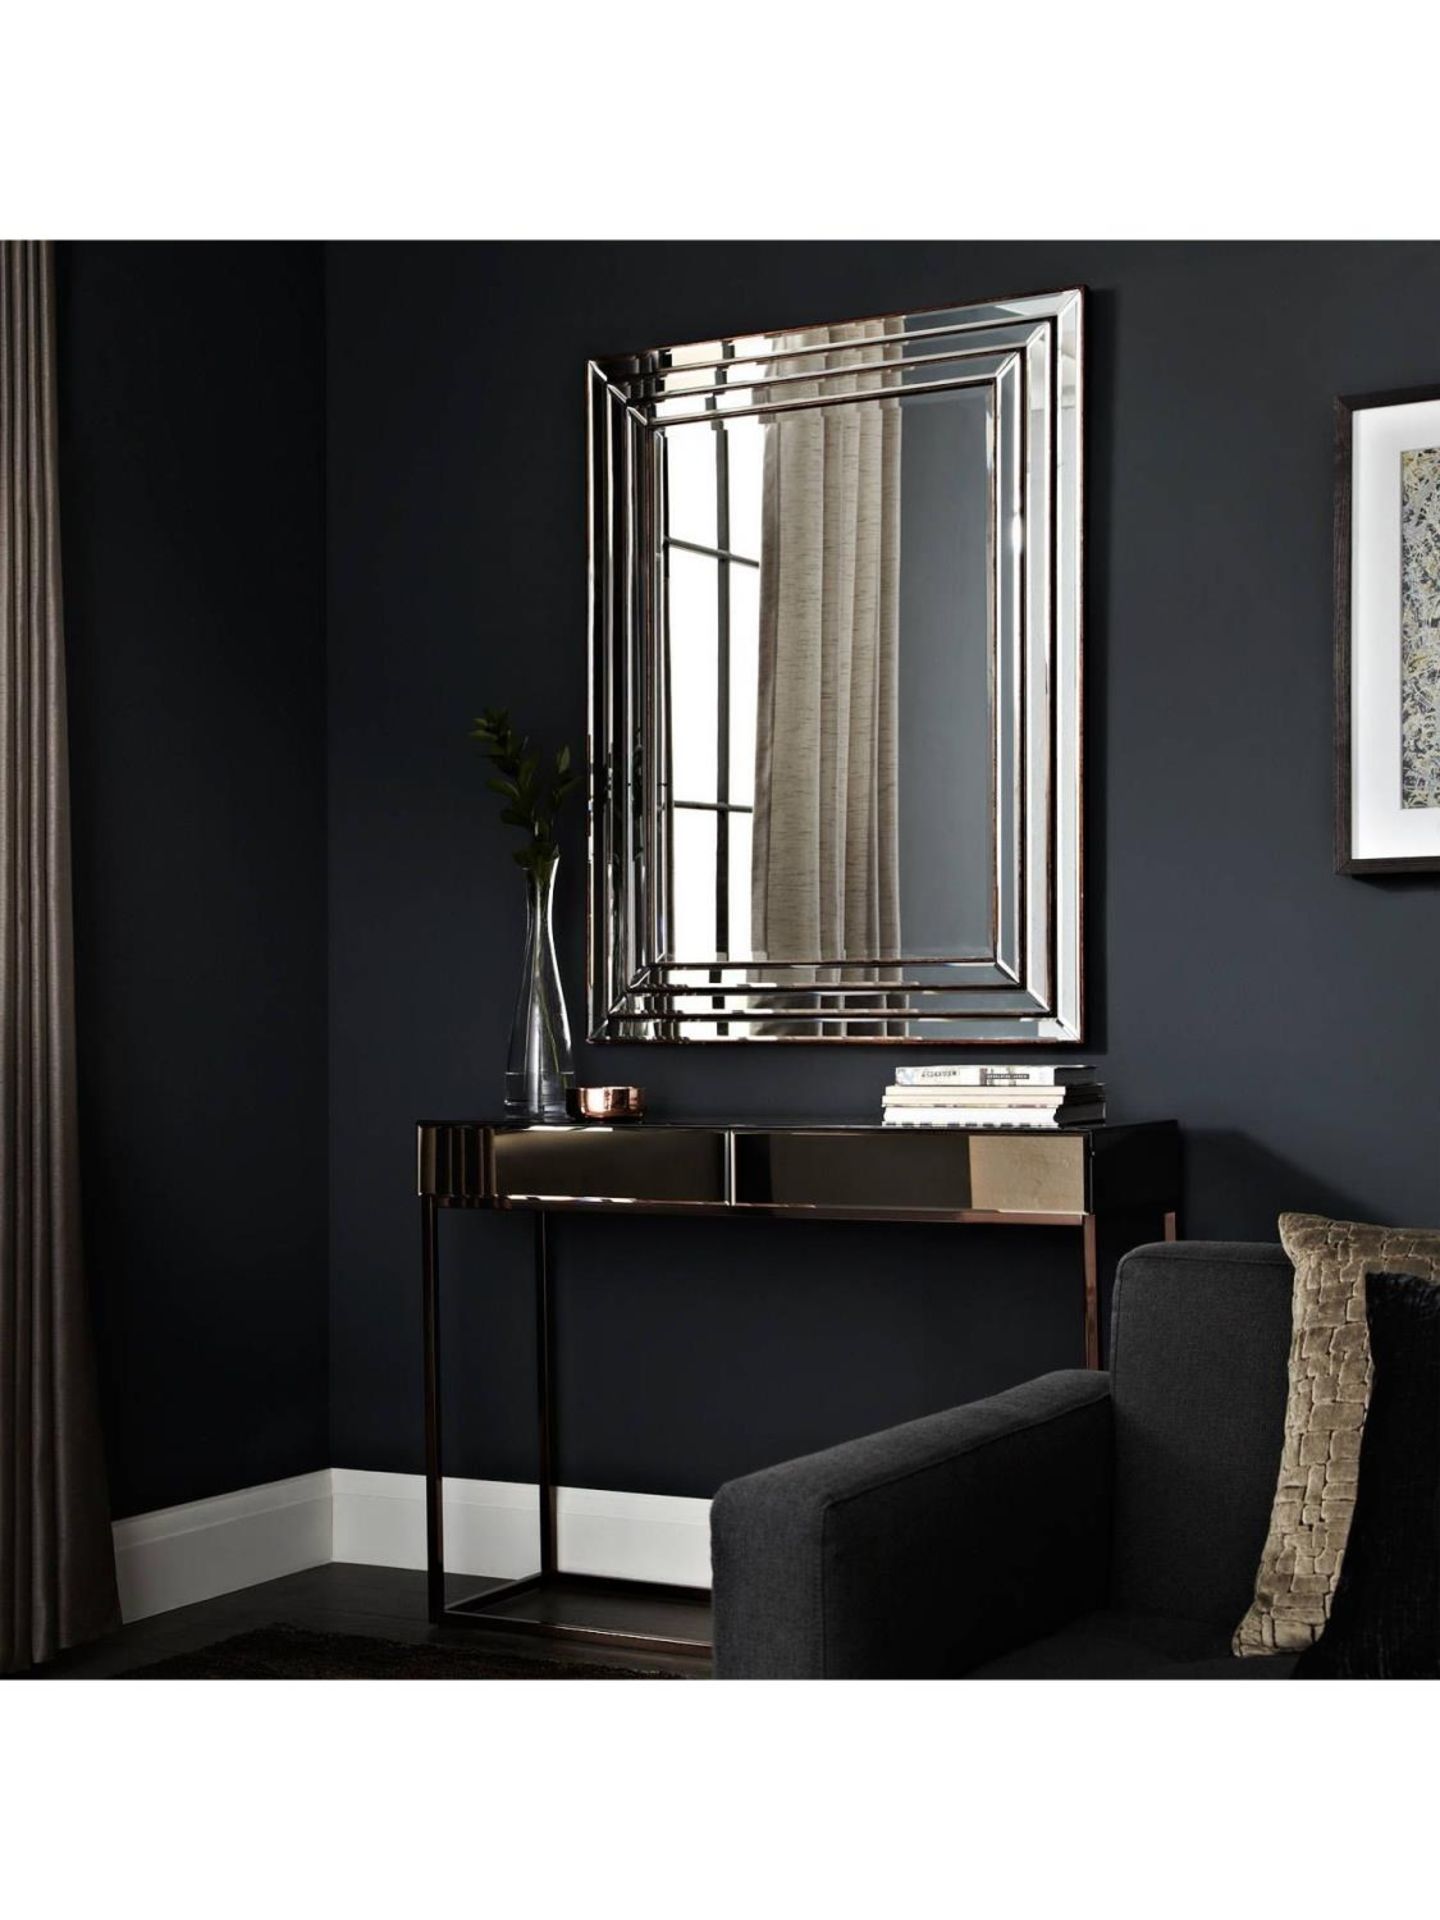 Chambery Champagne Mirror A Stunning Triple Step Bevelled Mirror Frame With A Warm Champagne